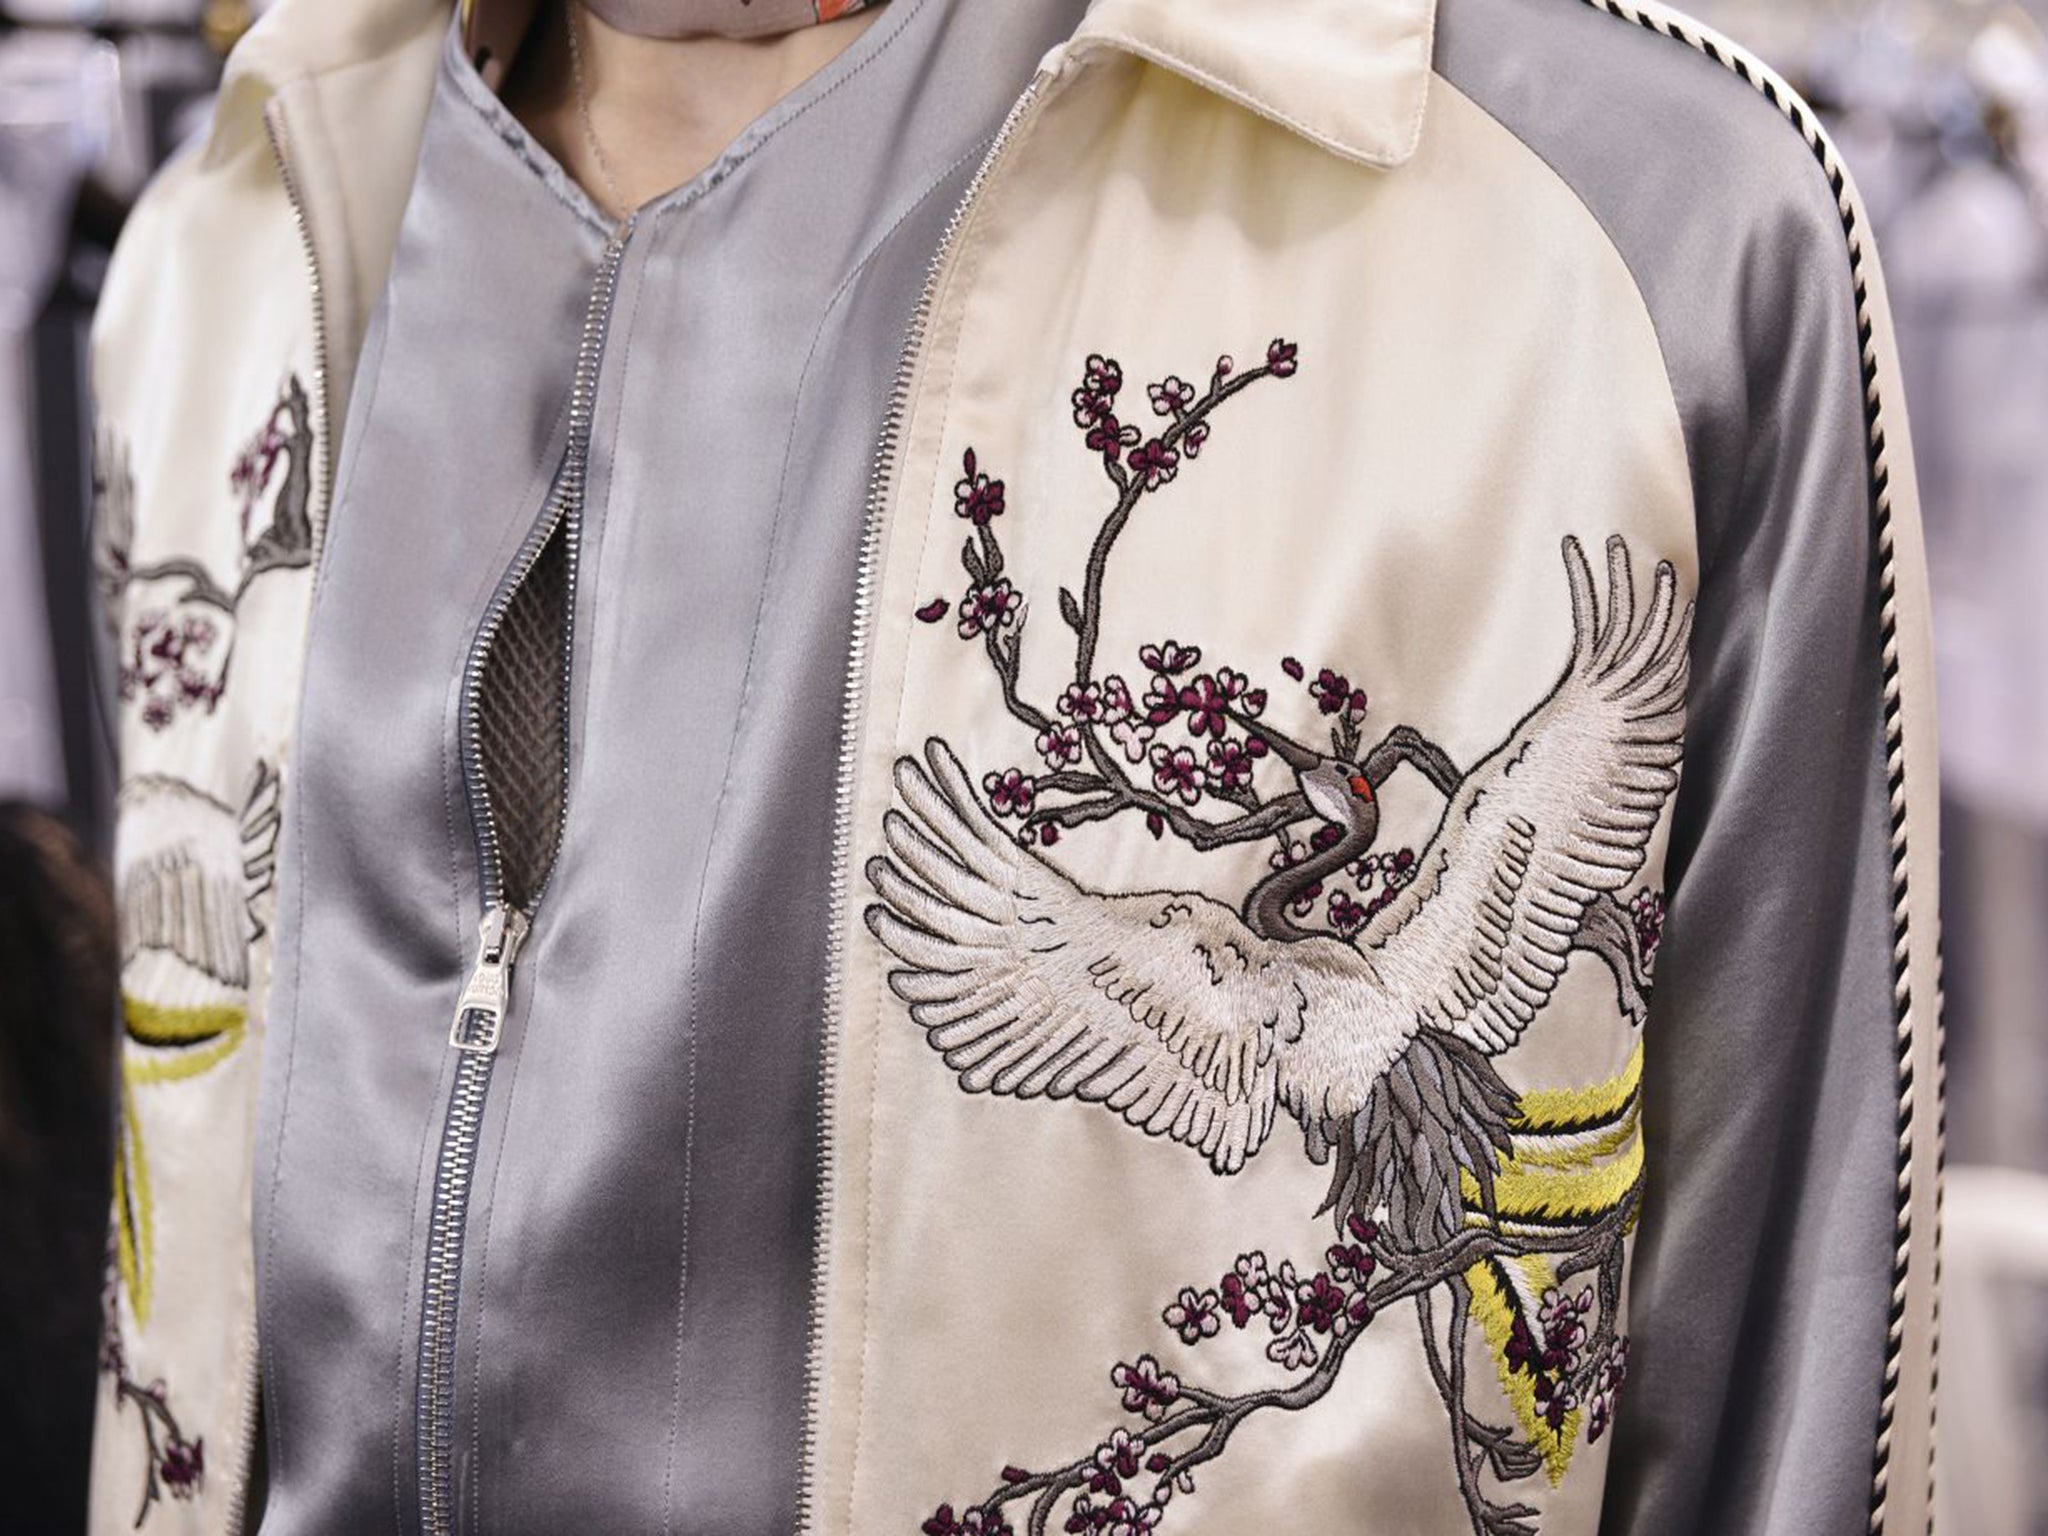 History repeating: An embroidered Louis Vuitton s/s ’16 jacket